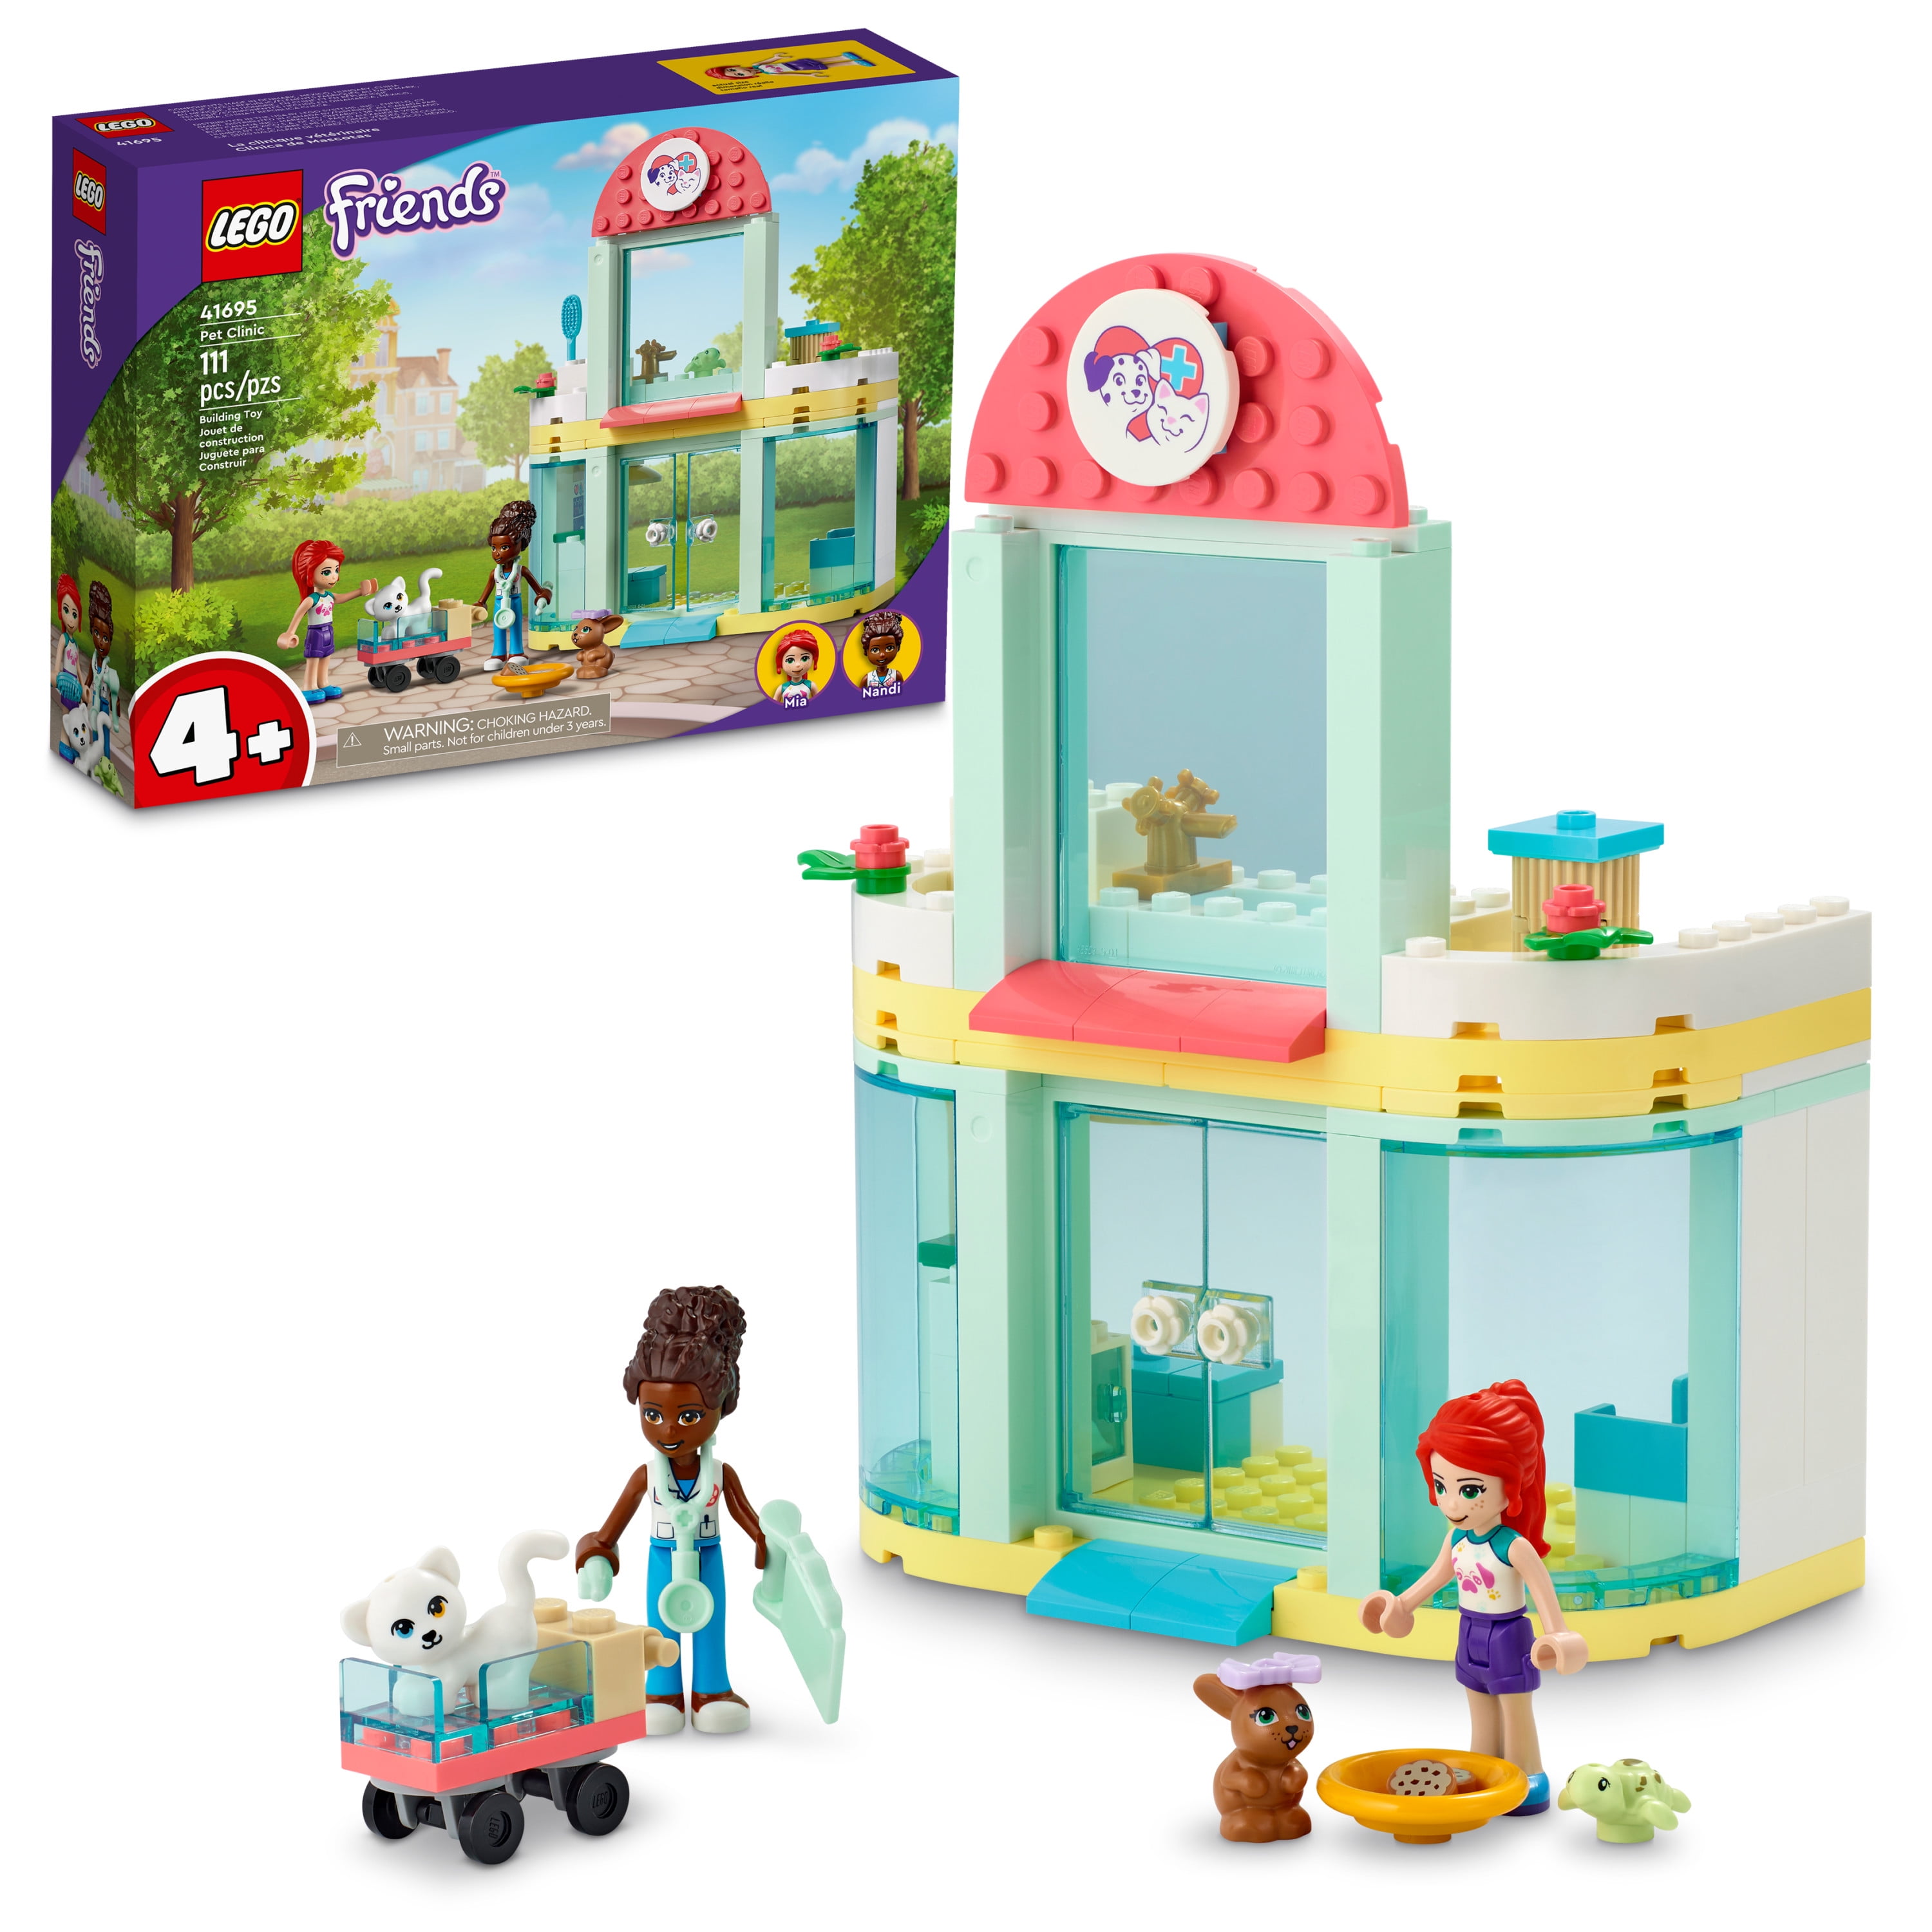 LEGO Friends Pet Clinic 41695 Building With 2 Mini-Dolls Including Mia, Plus Cat and Rabbit Toys; Creative Gift for Aged 4 and up (111 Pieces) - Walmart.com